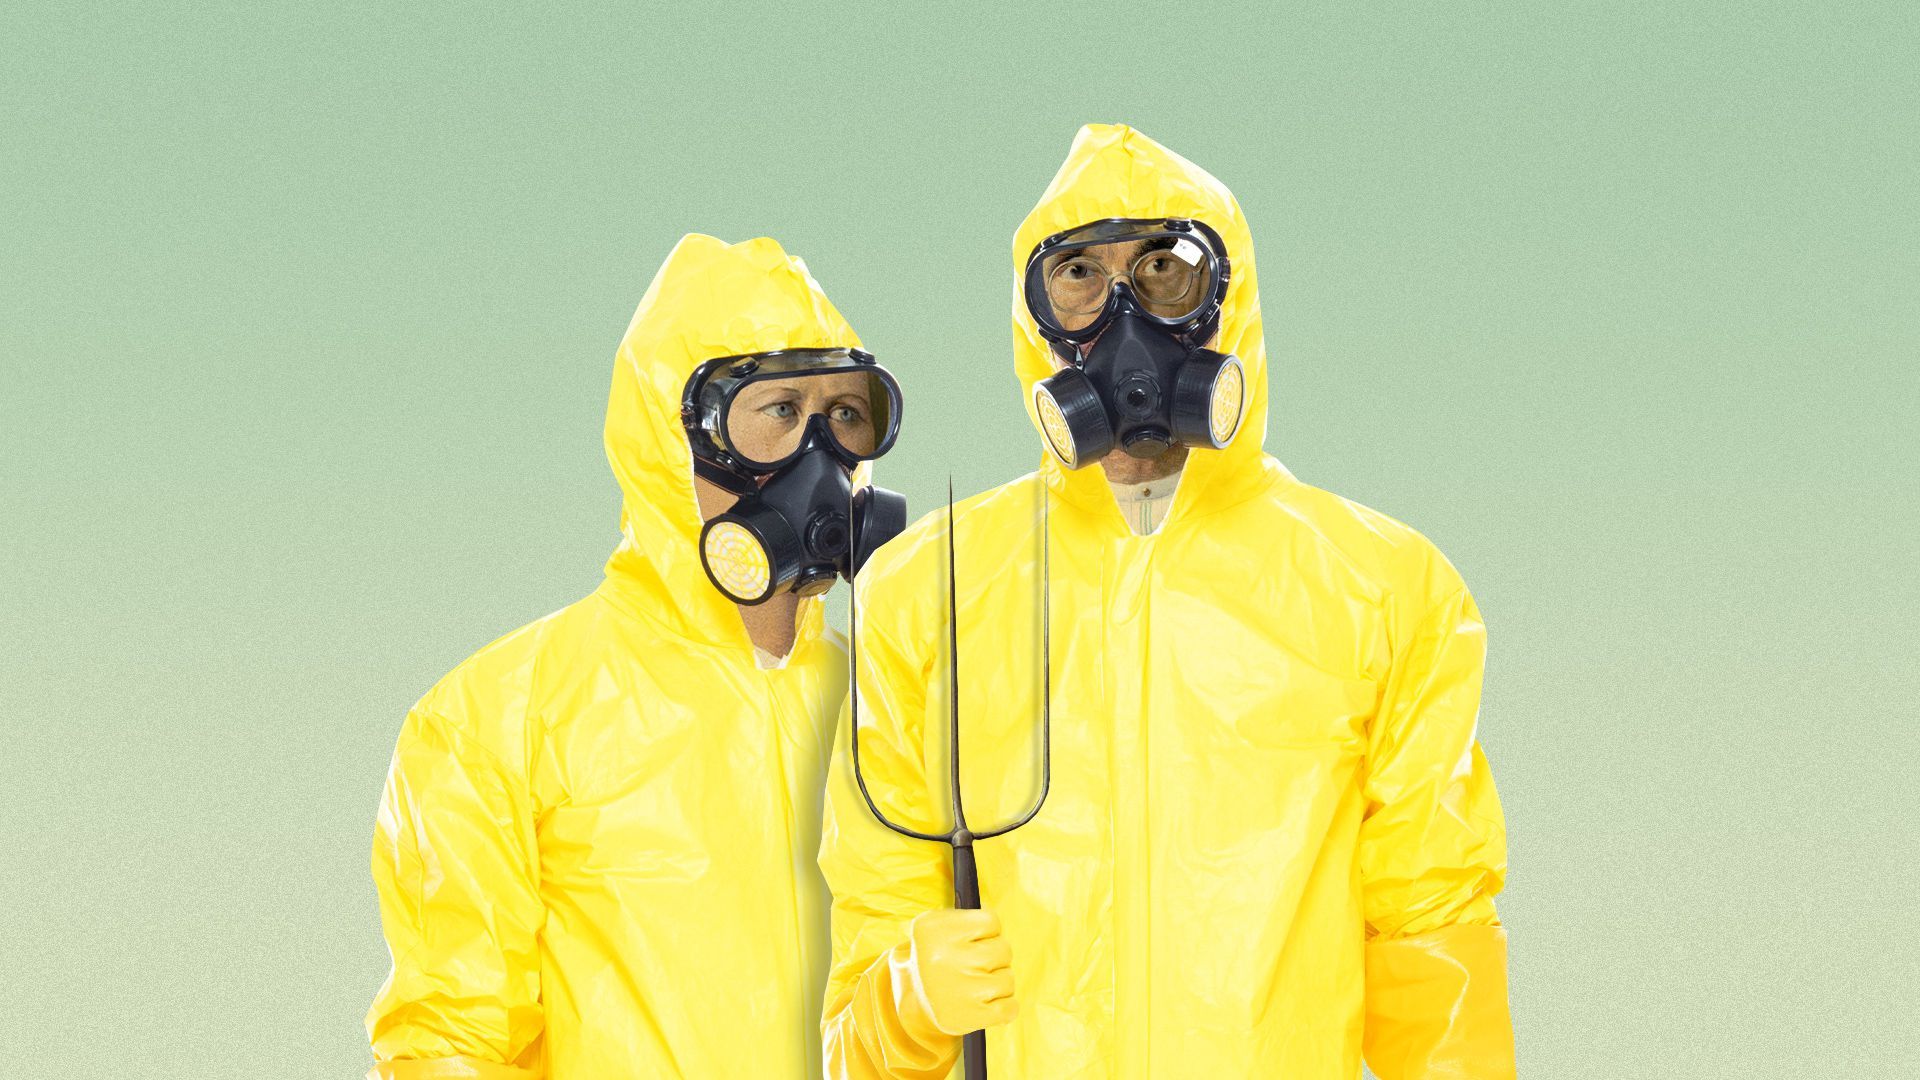 Illustration of American Gothic with the farmer and his wife in hazmat suits. 